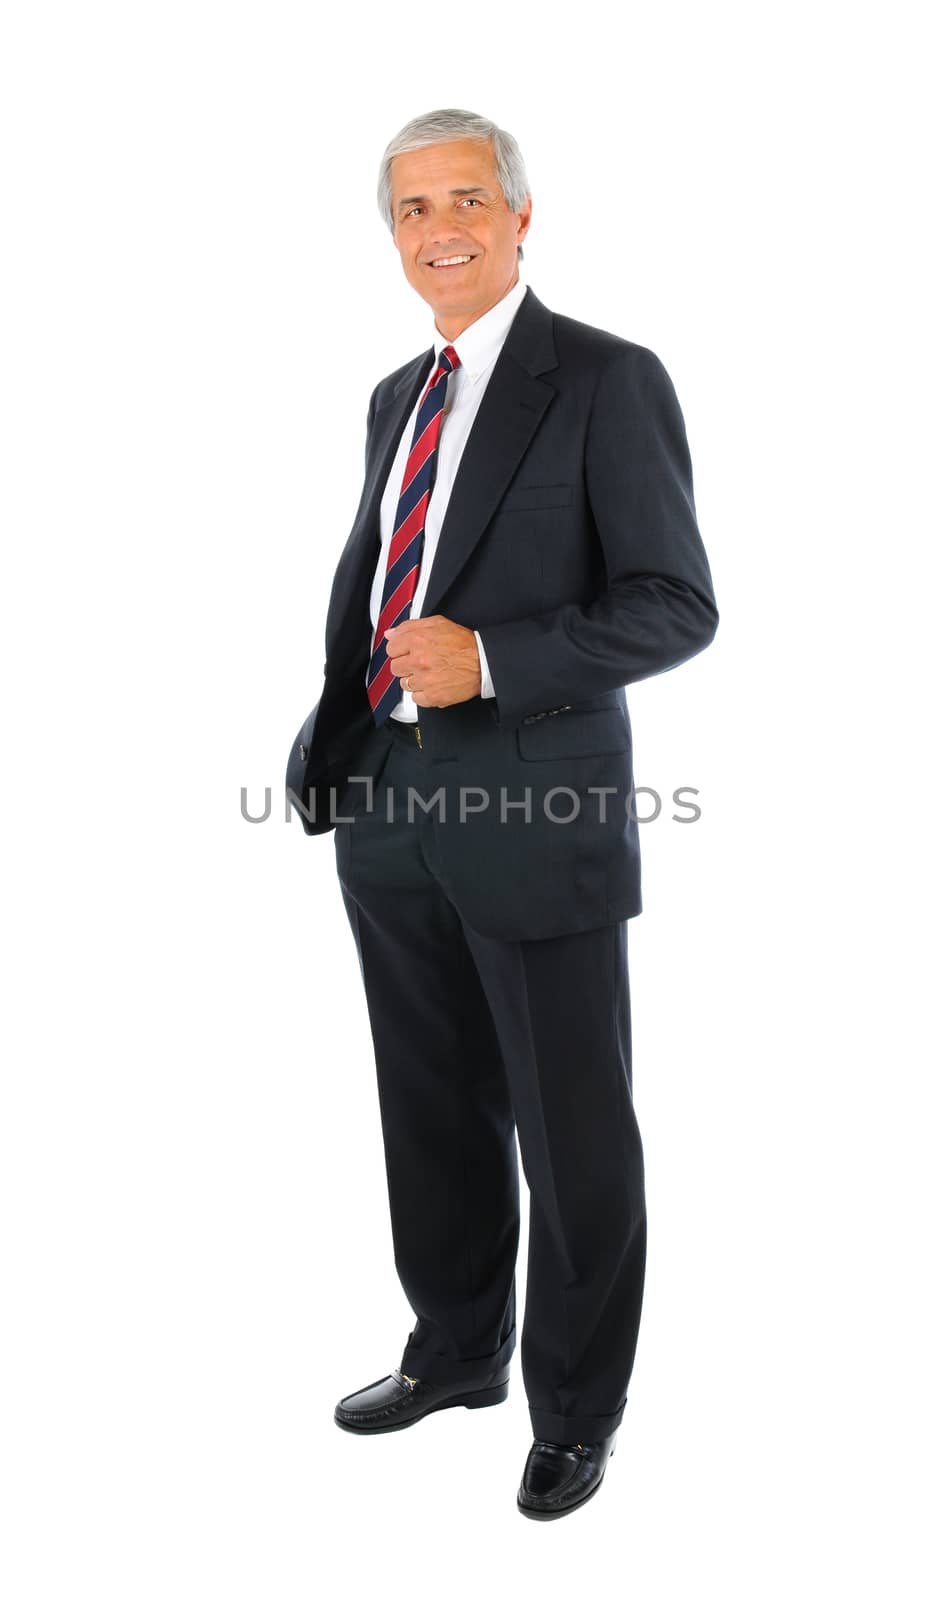 Smiling middle aged businessman in a suit and tie standing with one hand in his pocket. Full length over a white background.